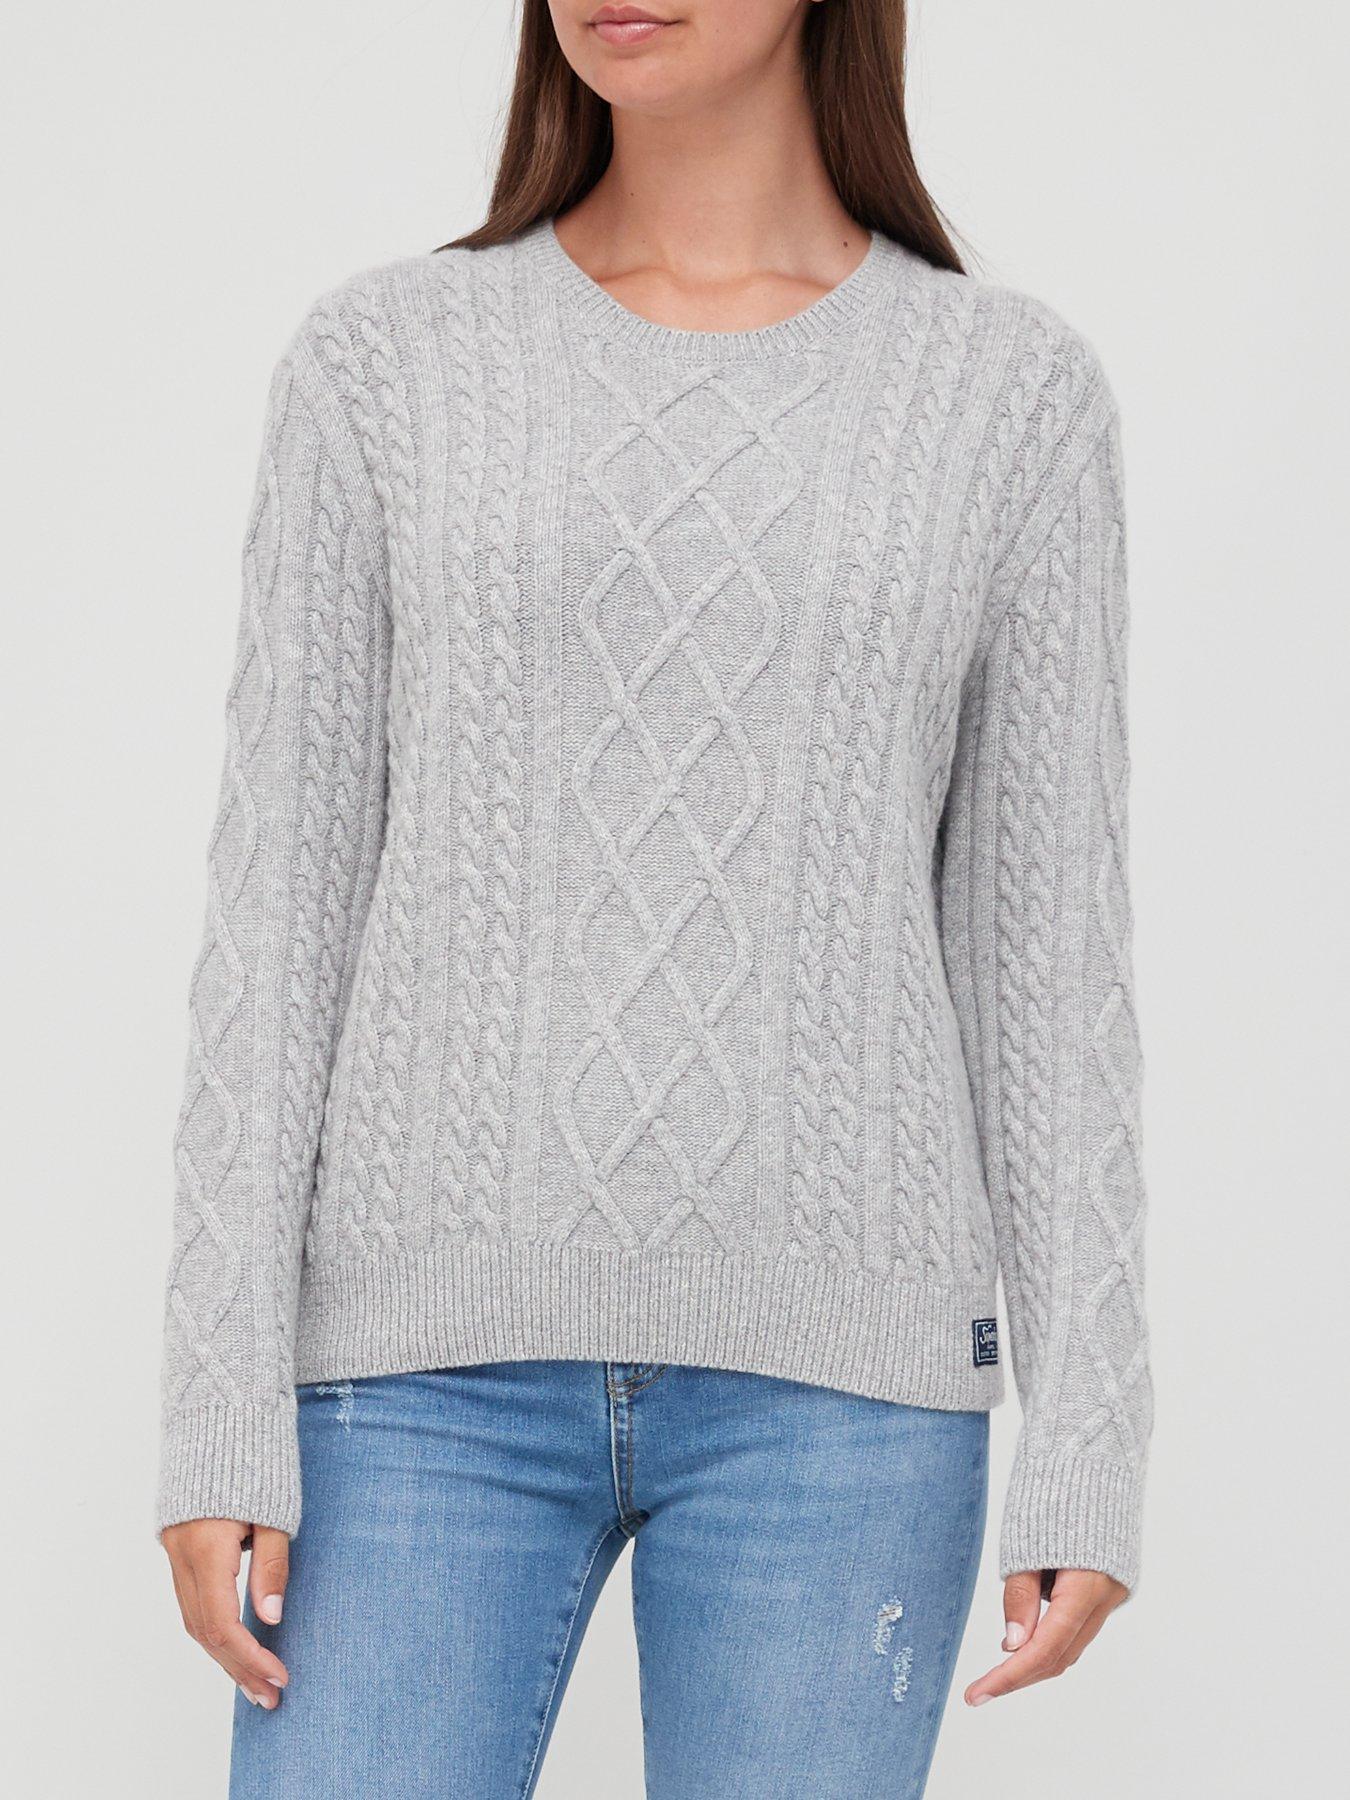 Knitwear Premium Cable Knit Crew Neck Jumper - Light Silver Marl